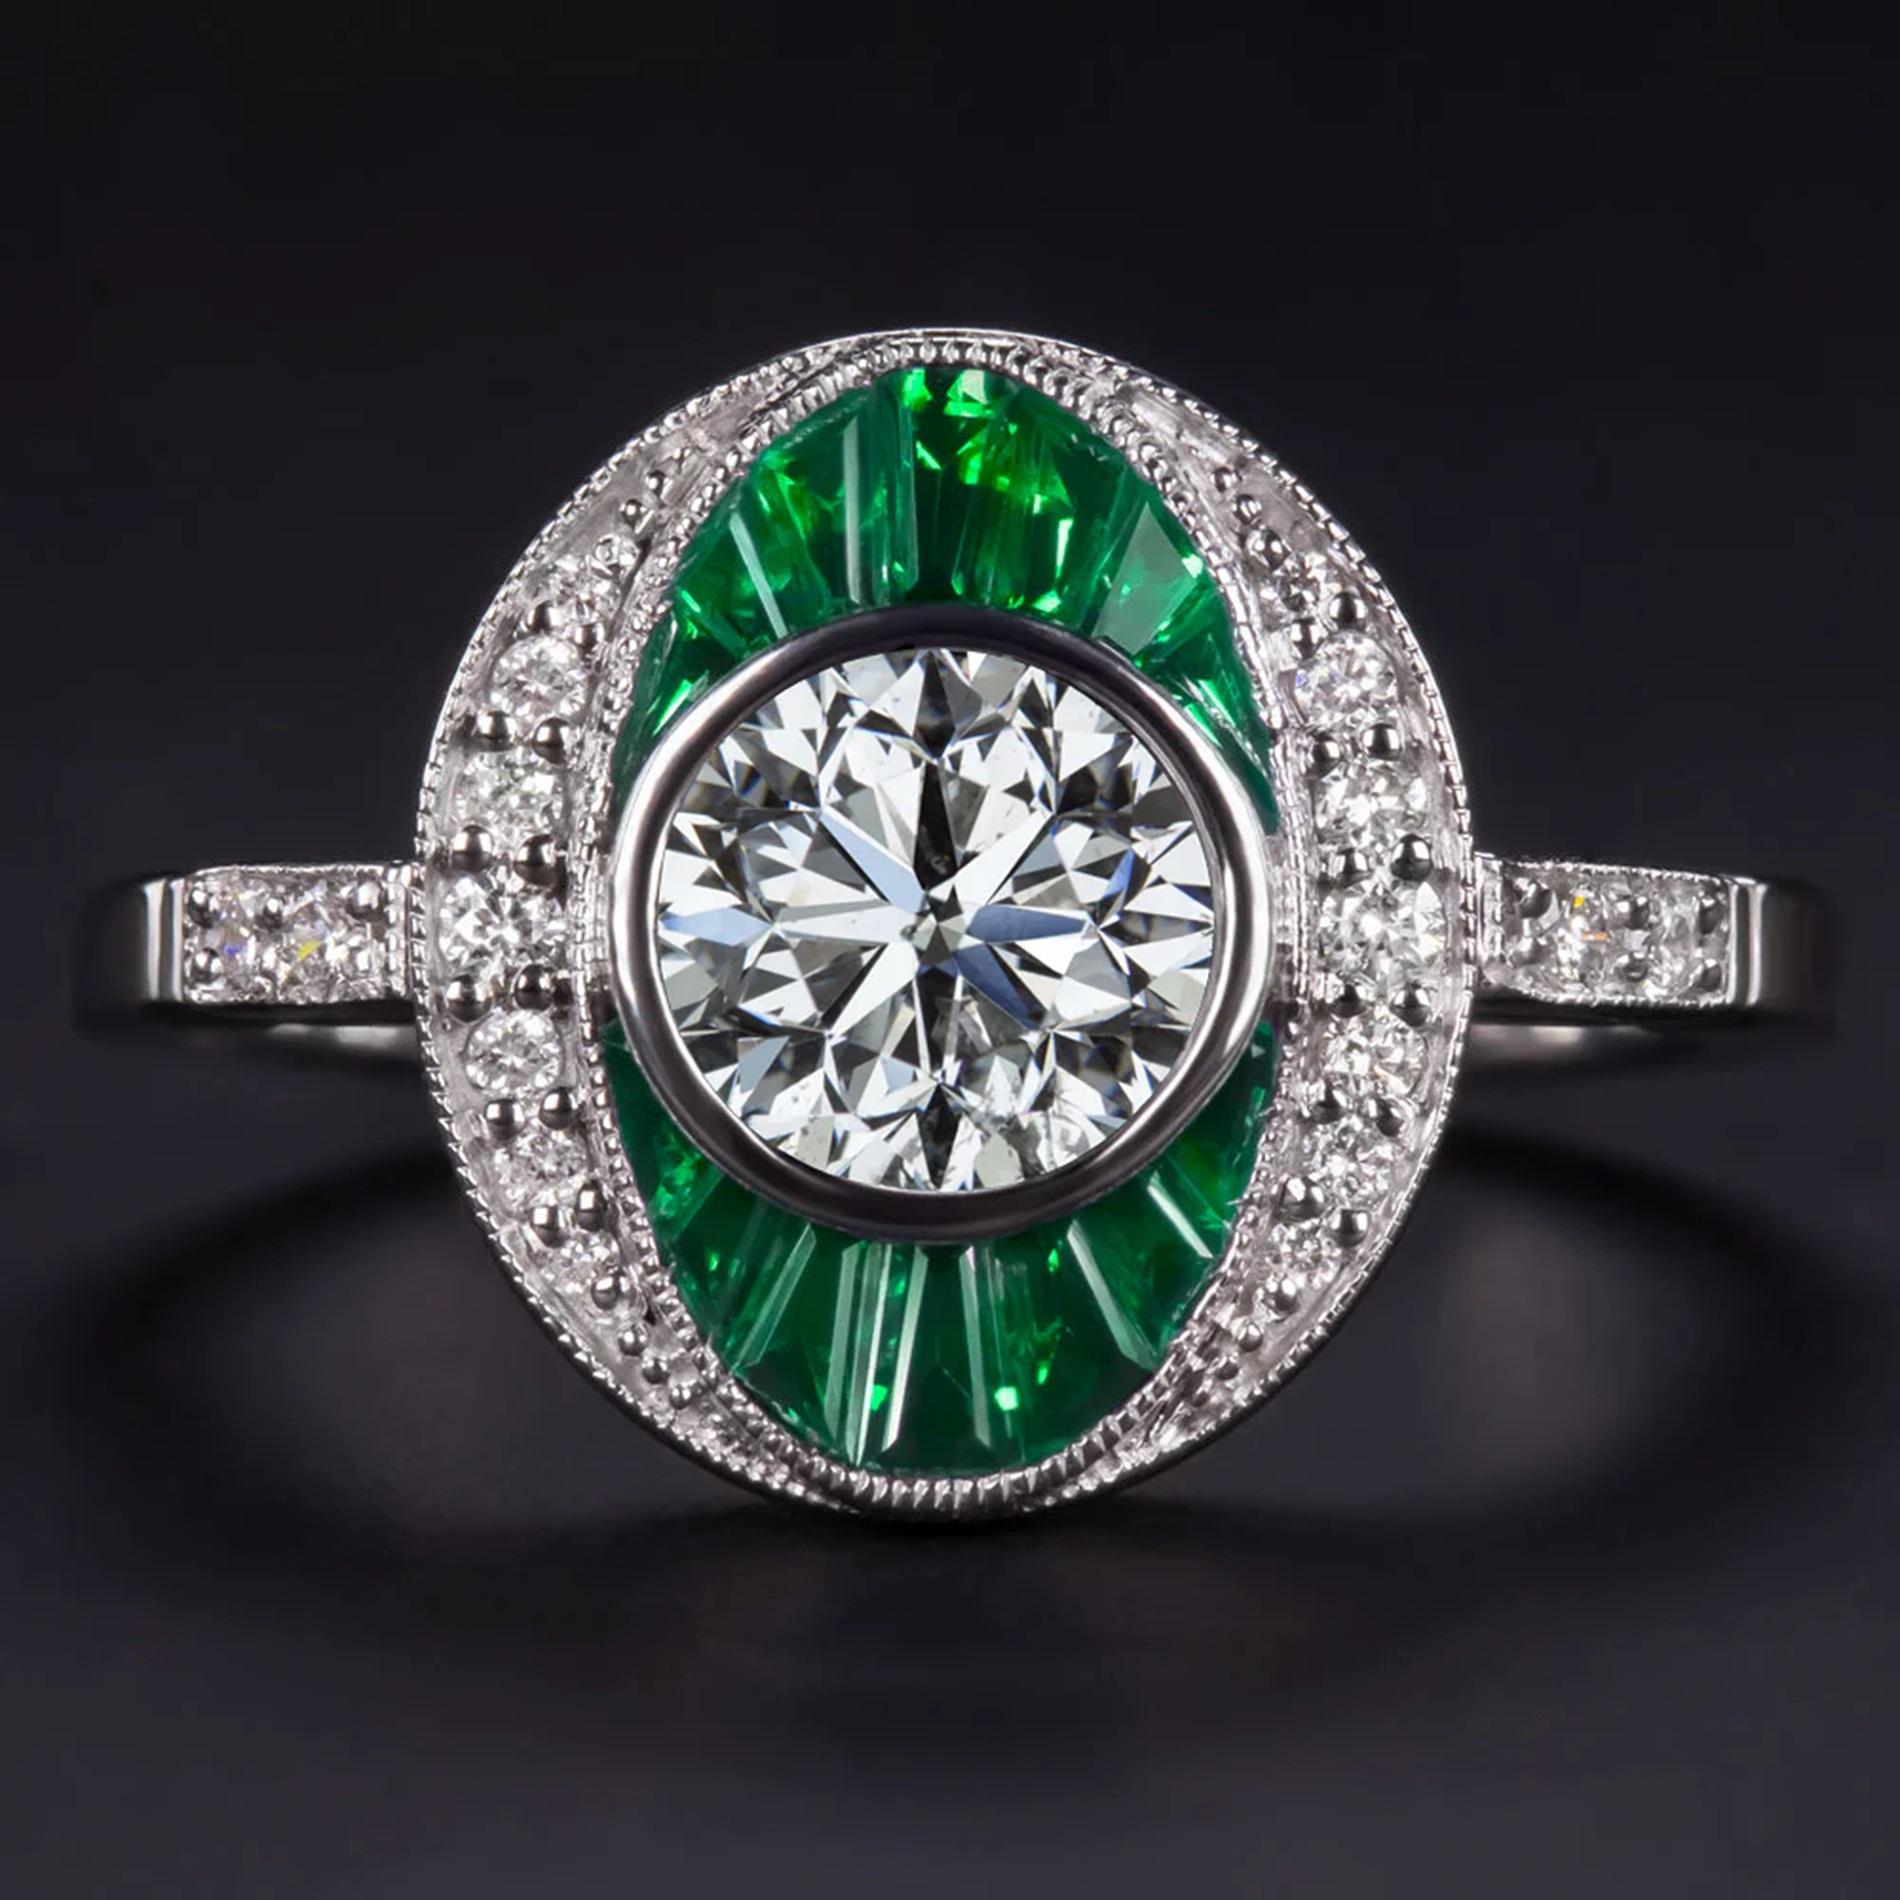 Contemporary Art Deco-Inspired Diamond and Emerald Ring For Sale